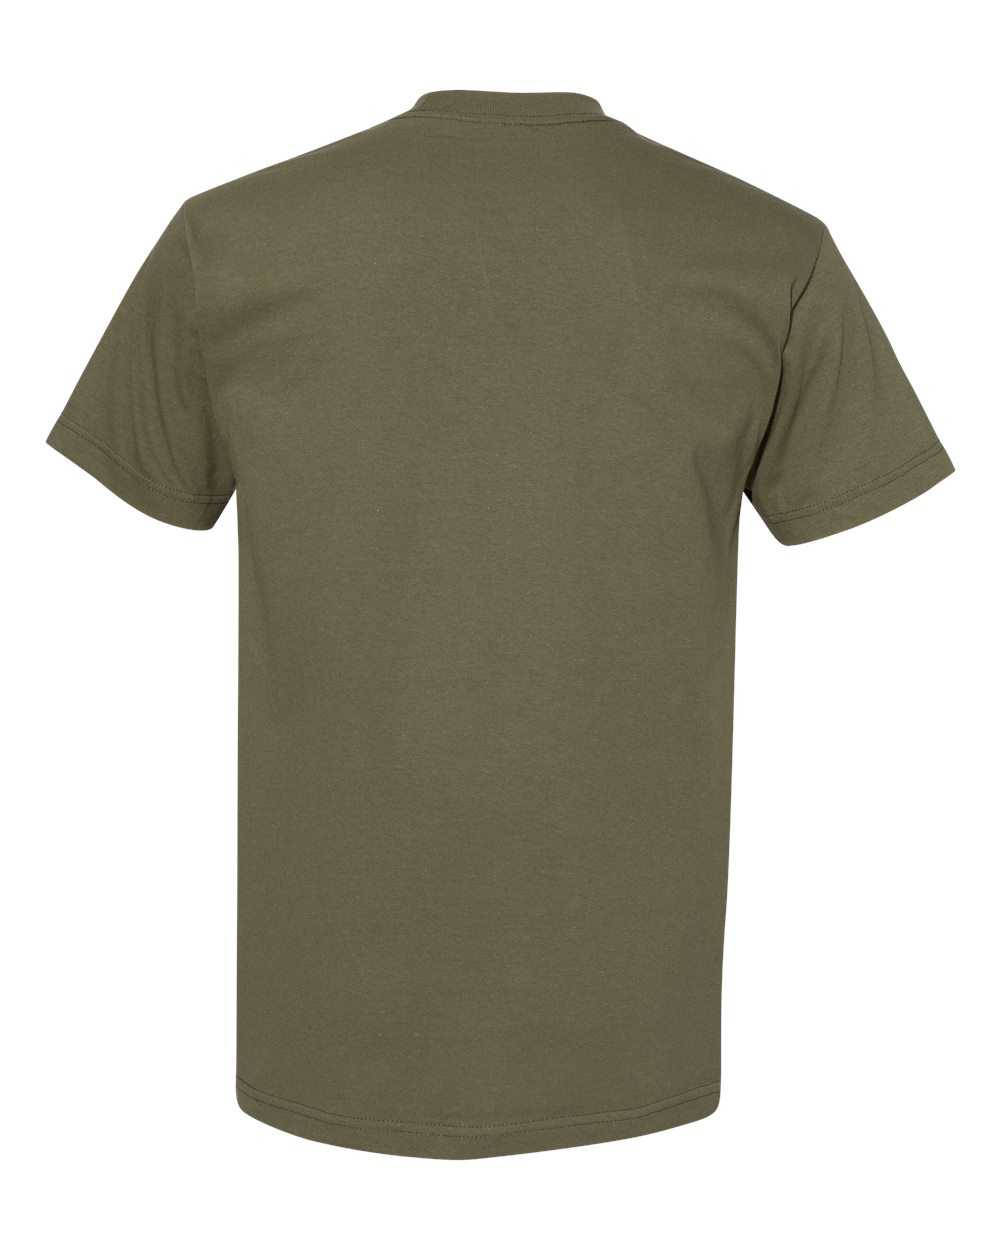 American Apparel 1301 Unisex Heavyweight Cotton T-Shirt - Military Green - HIT a Double